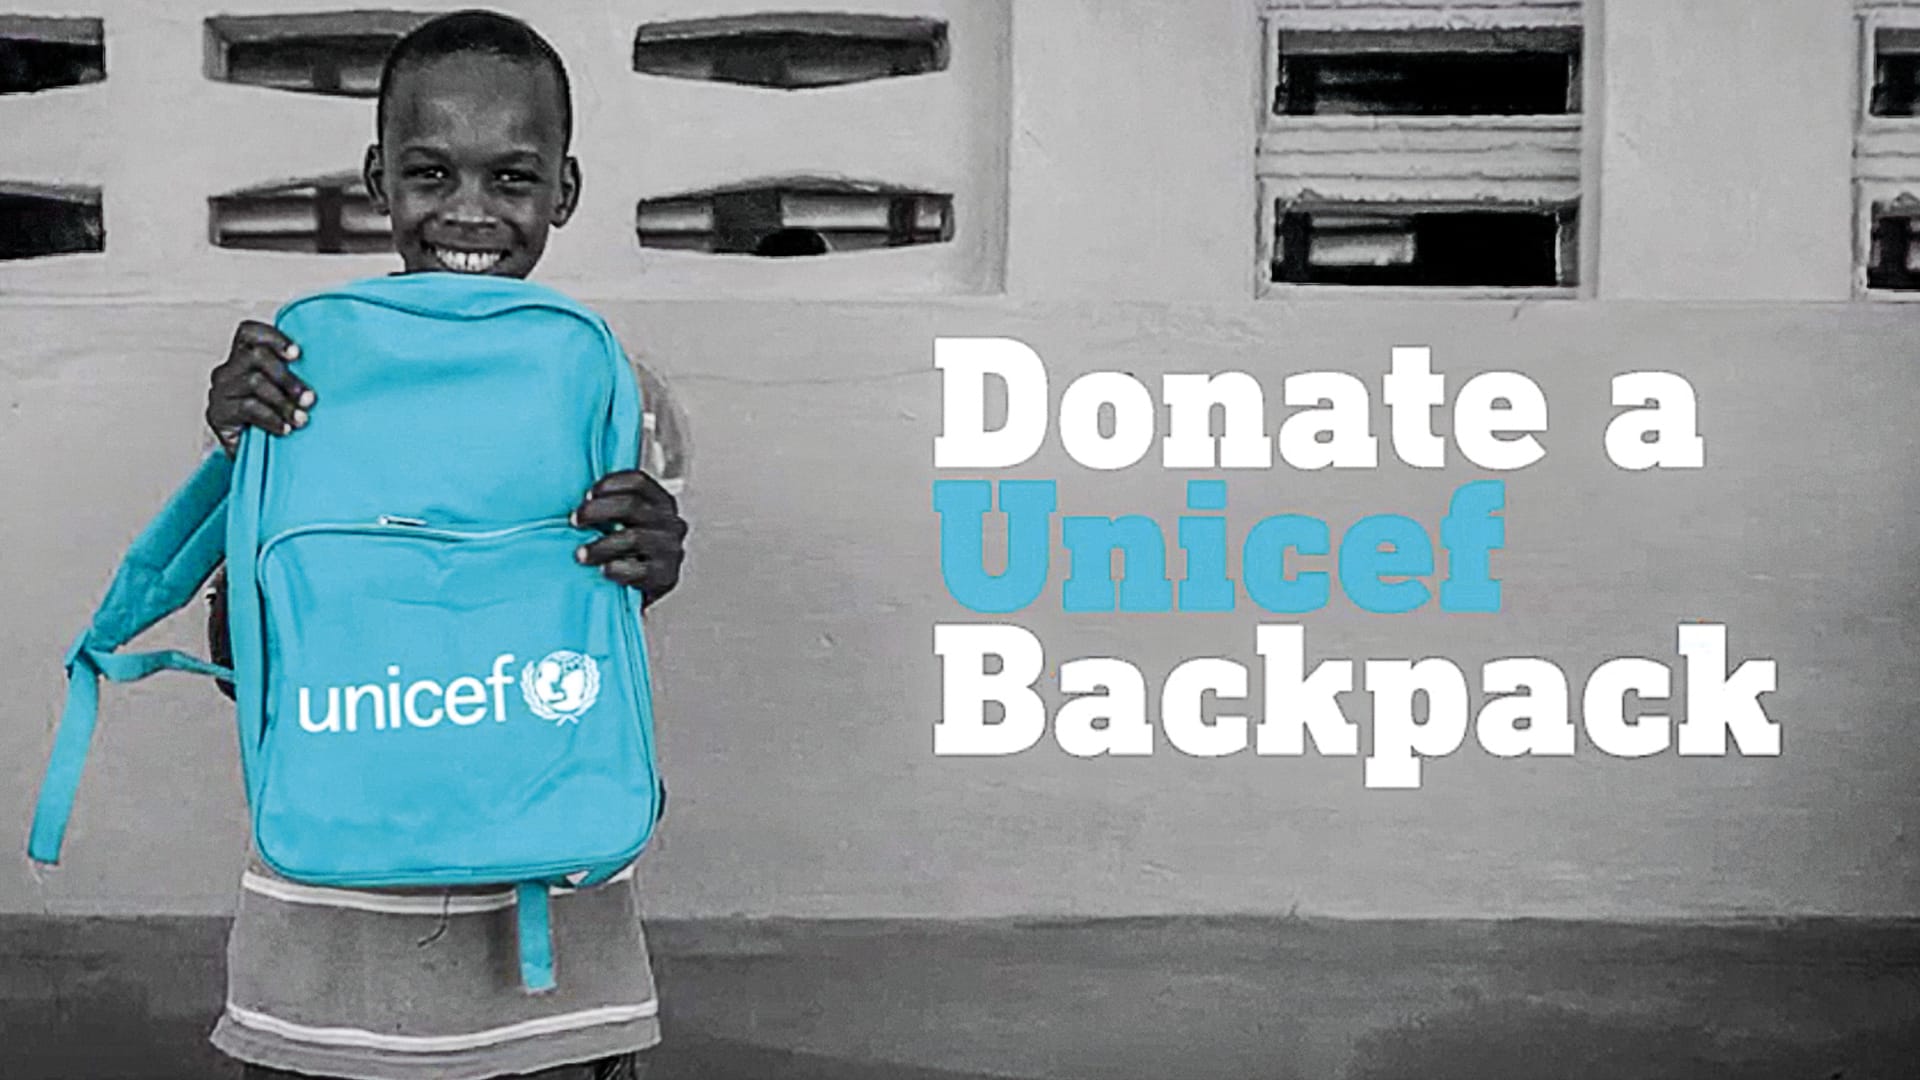 A child holding a Unicef backpack